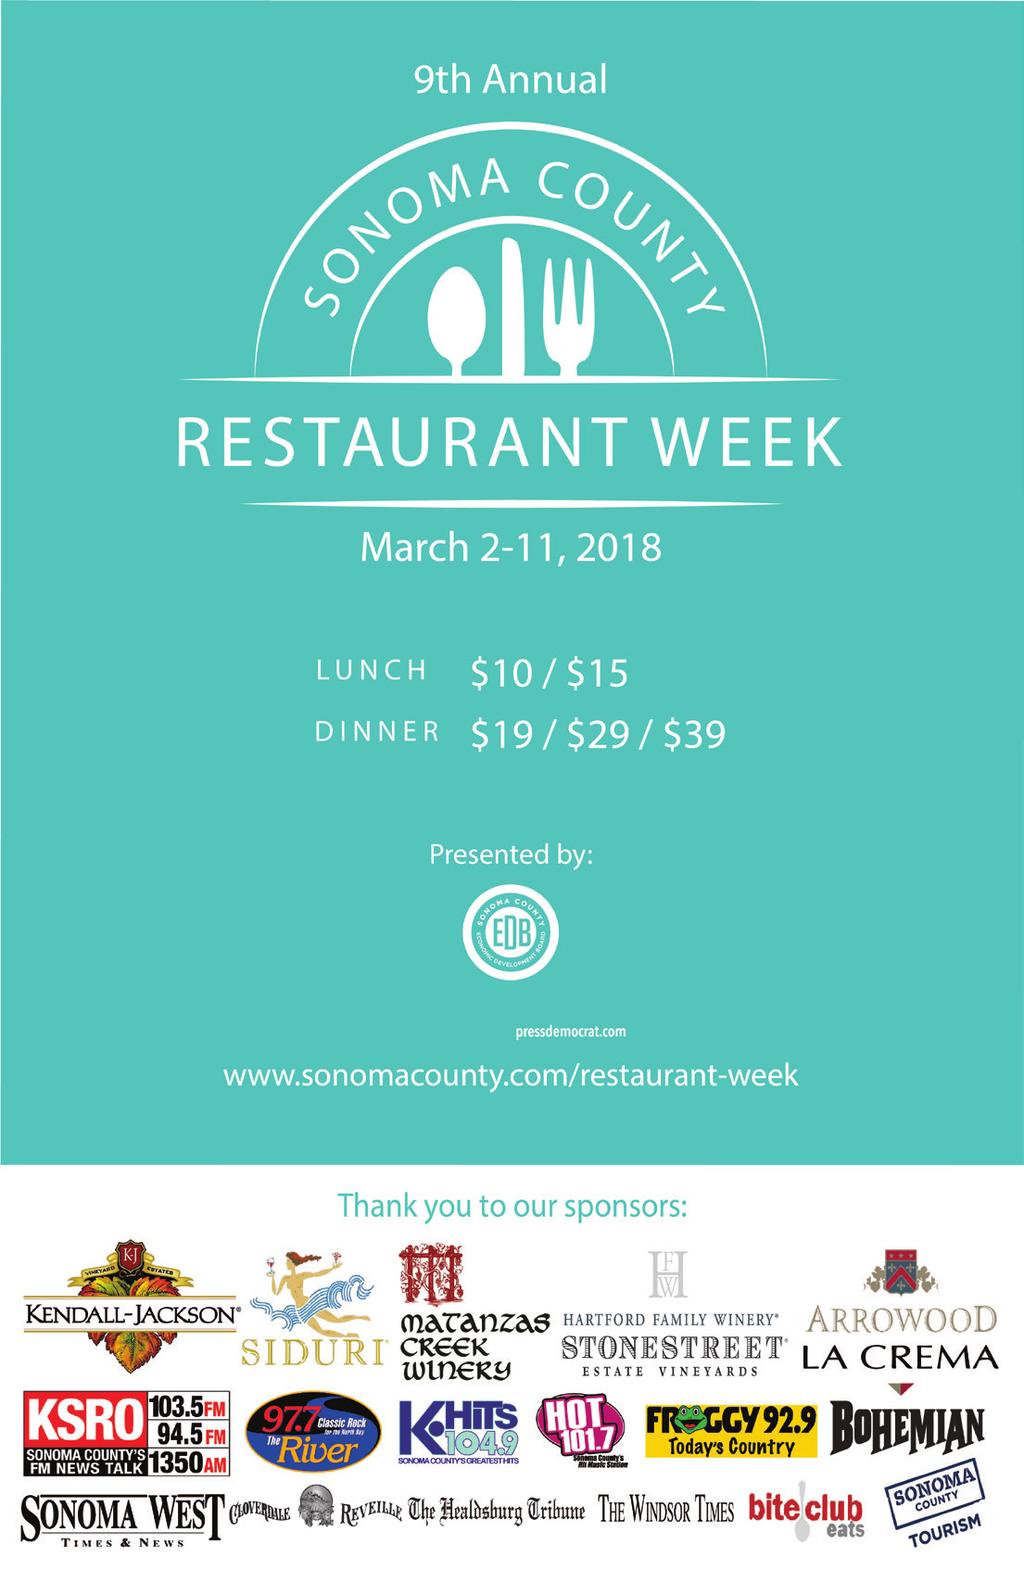 SONOMA COUNTY RESTAURANT WEEK REPORT ADVERTISING EXAMPLES Advertising Above are two examples of physical advertising collateral used to publicize Restaurant Week.